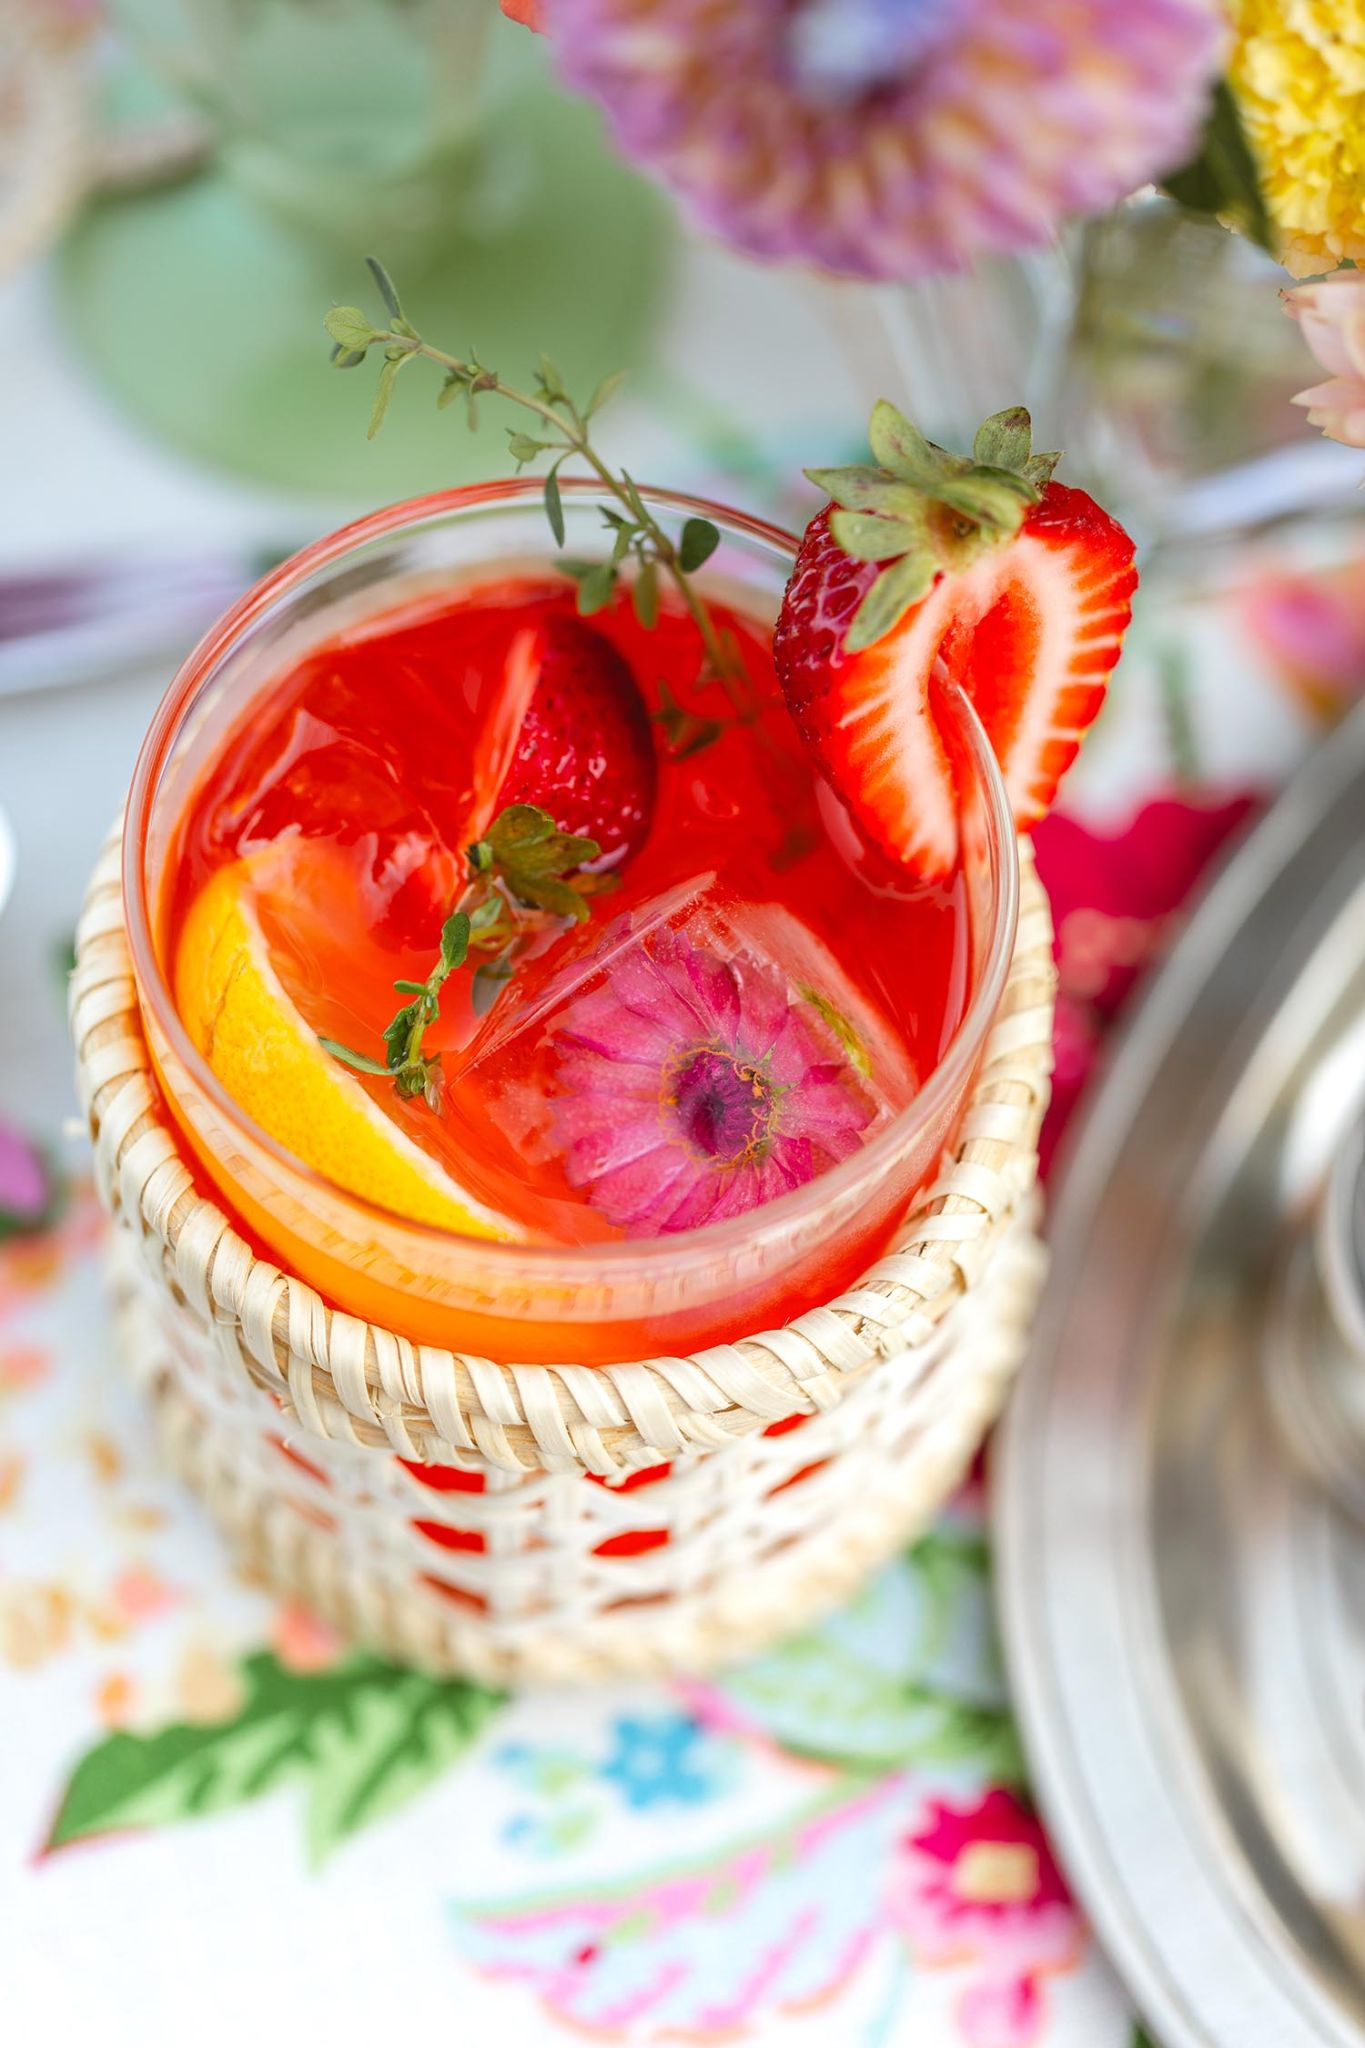 A closeup of a cup with floral ice cubes and a strawberry lemonade drink.